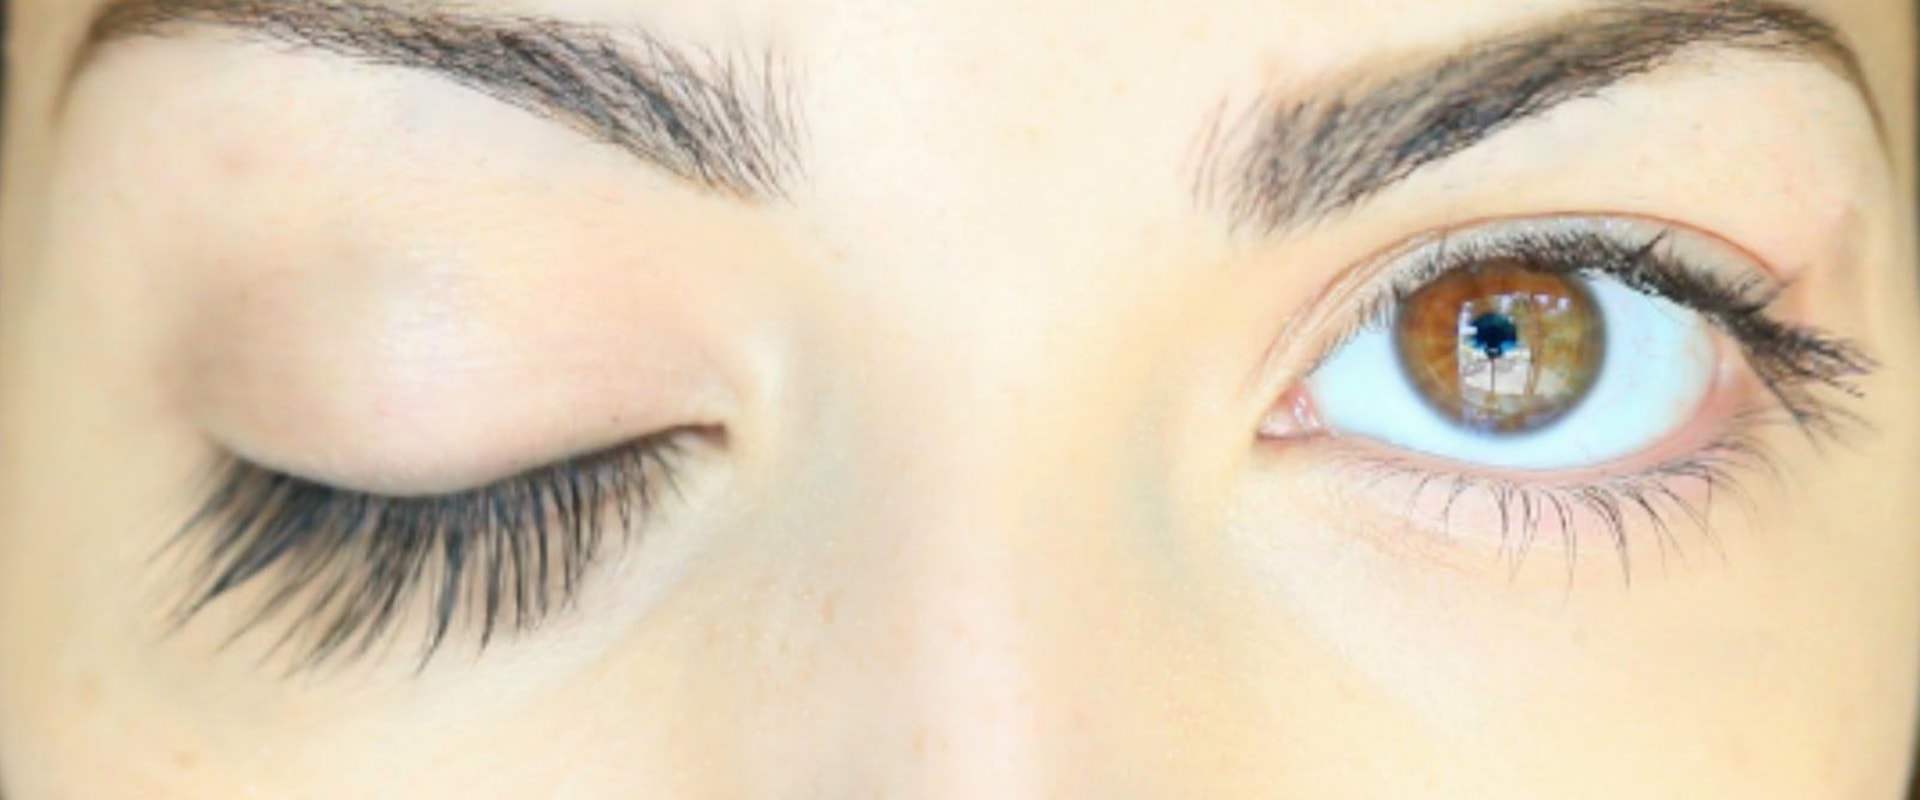 How much do eyelashes grow in a week?